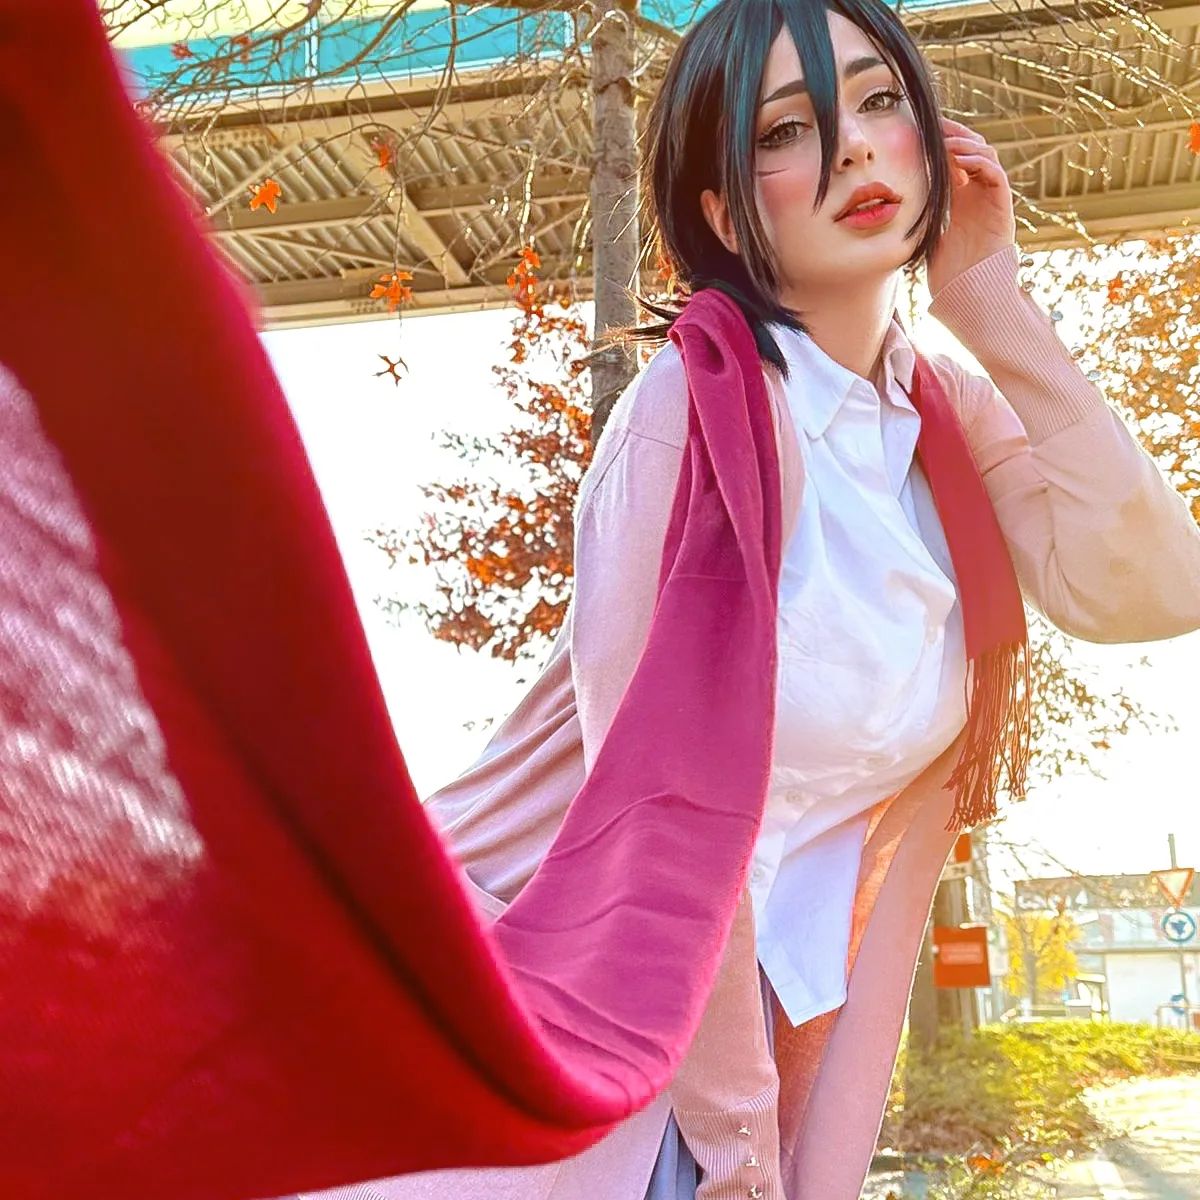 «𝓲𝓽𝓽𝓮𝓻𝓪𝓼𝓼𝓱𝓪𝓲, 𝓔𝓻𝓮𝓷» ❤️🪽
After such an emotional ending of the AOT anime, I wanted to cosplay Mikasa again after so many years 🥹 it was very exciting to bring this version of her 🩷 What do you think about this ending? 💕
#mikasaackerman #mikasacosplay #aot #snk #aotcosplay #attackontitan #eremika